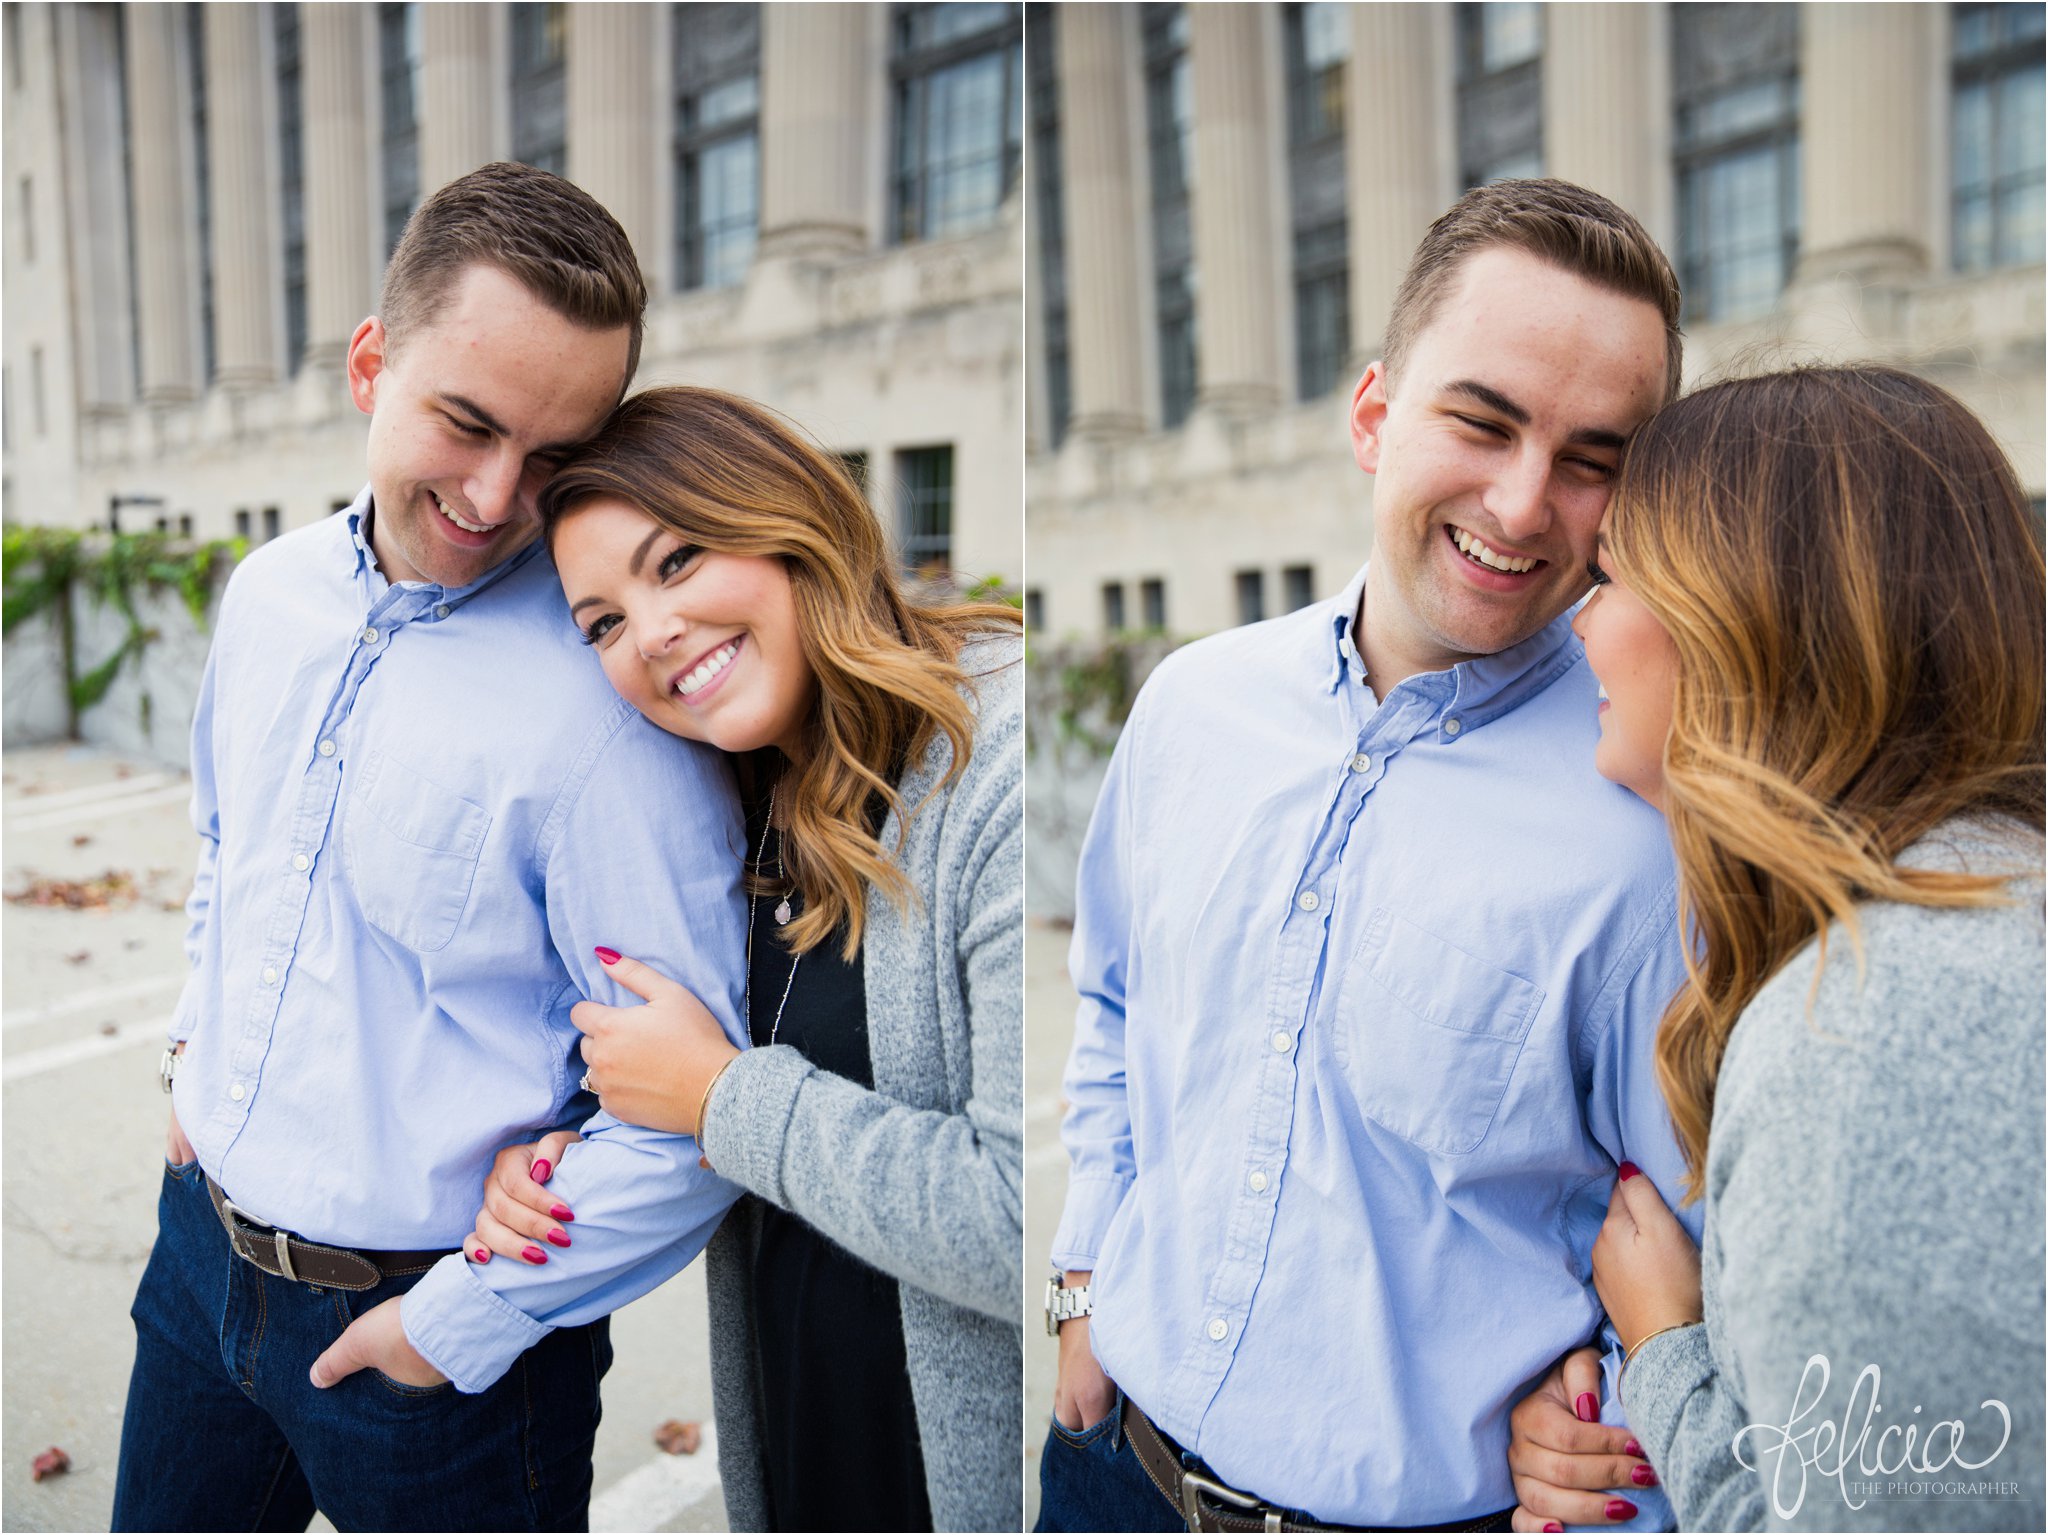 engagement photos | engagement photography | Kansas City | images by feliciathephotographer.com | architectural backgrounds | happy couple | linked arms | chin on shoulder | romance 